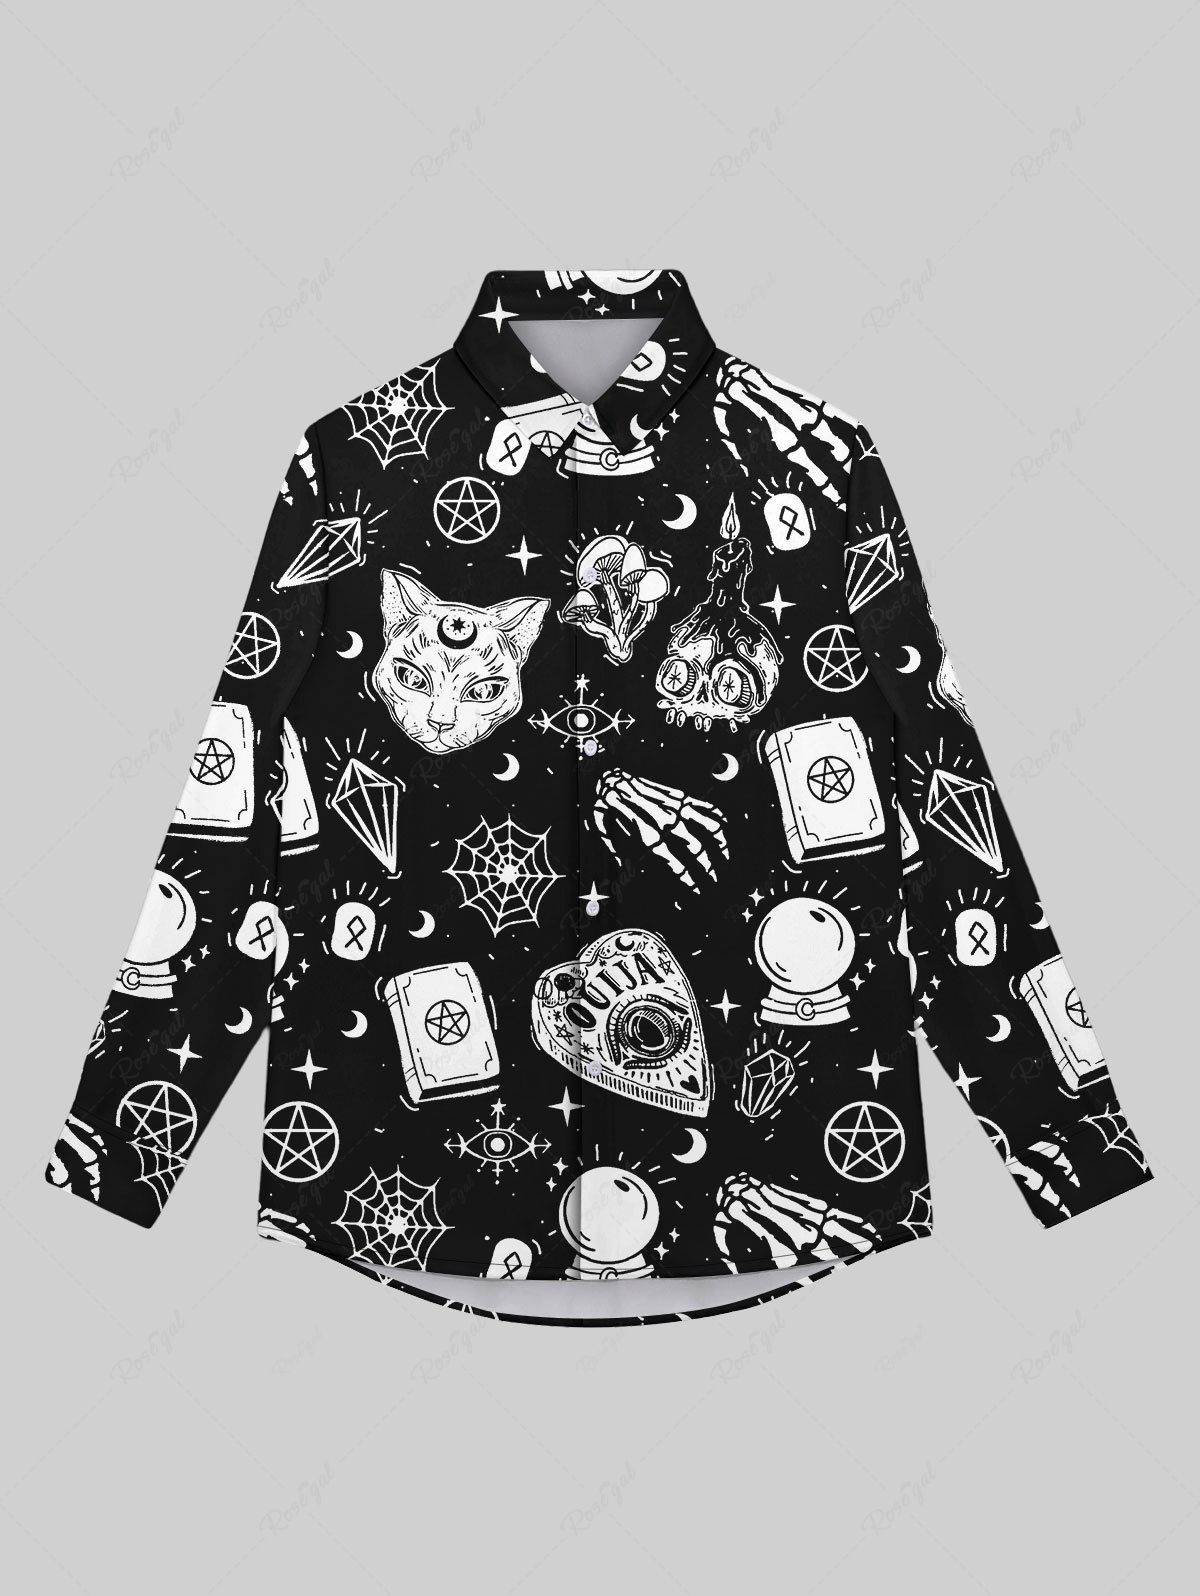 Fancy Gothic Galaxy Moon Star Spider Web Skulls Candle Flame Cat Print Button Down Shirt For Men  